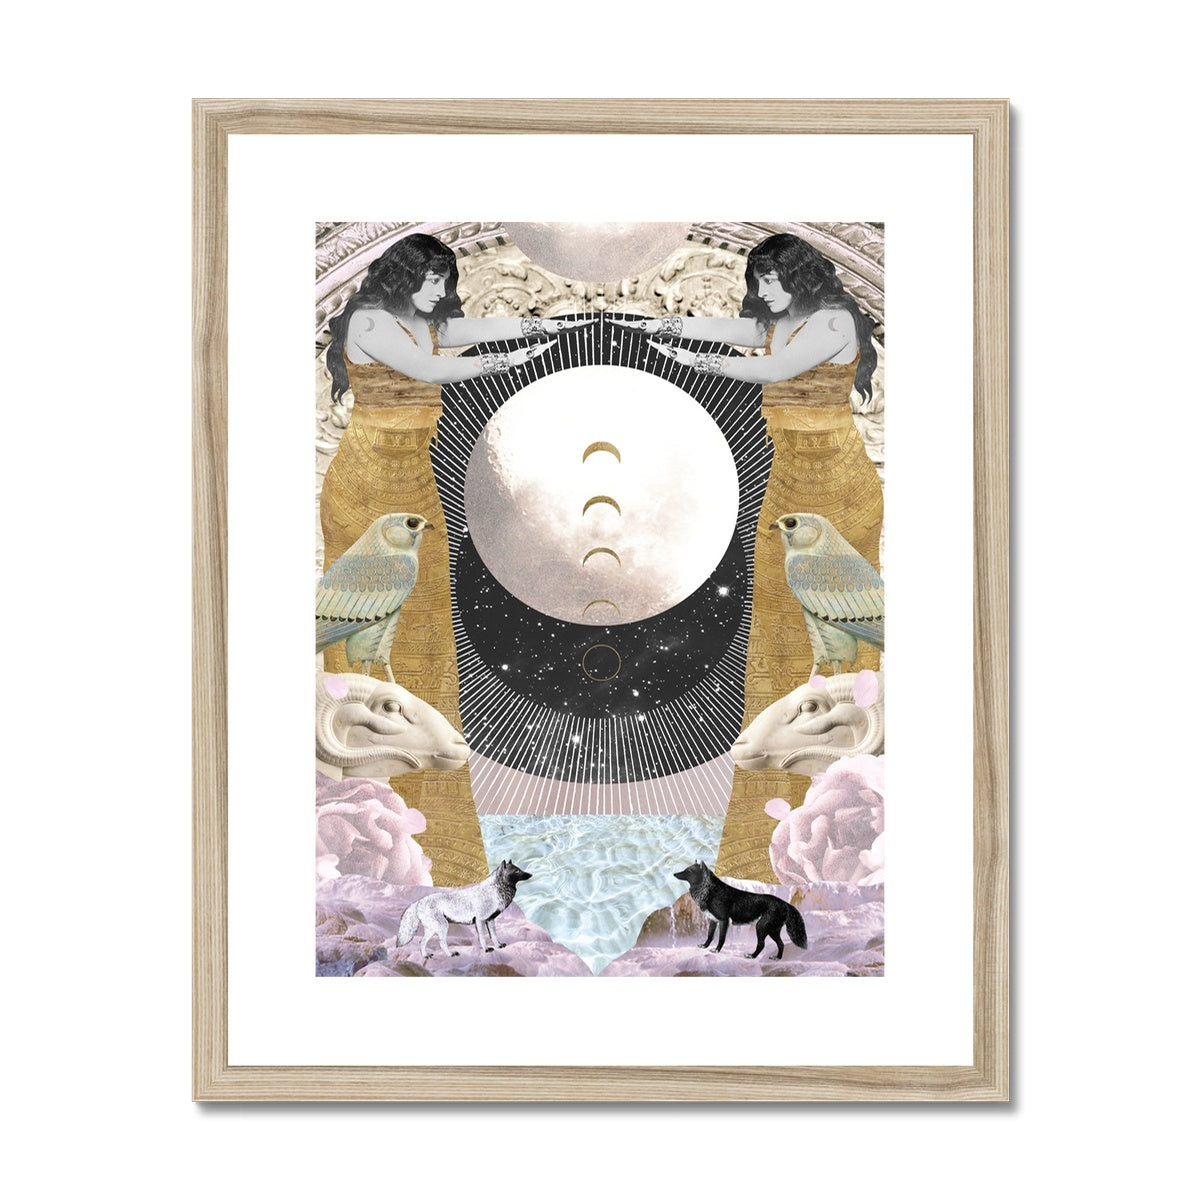 The Moon Framed & Mounted Print - Starseed Designs Inc.